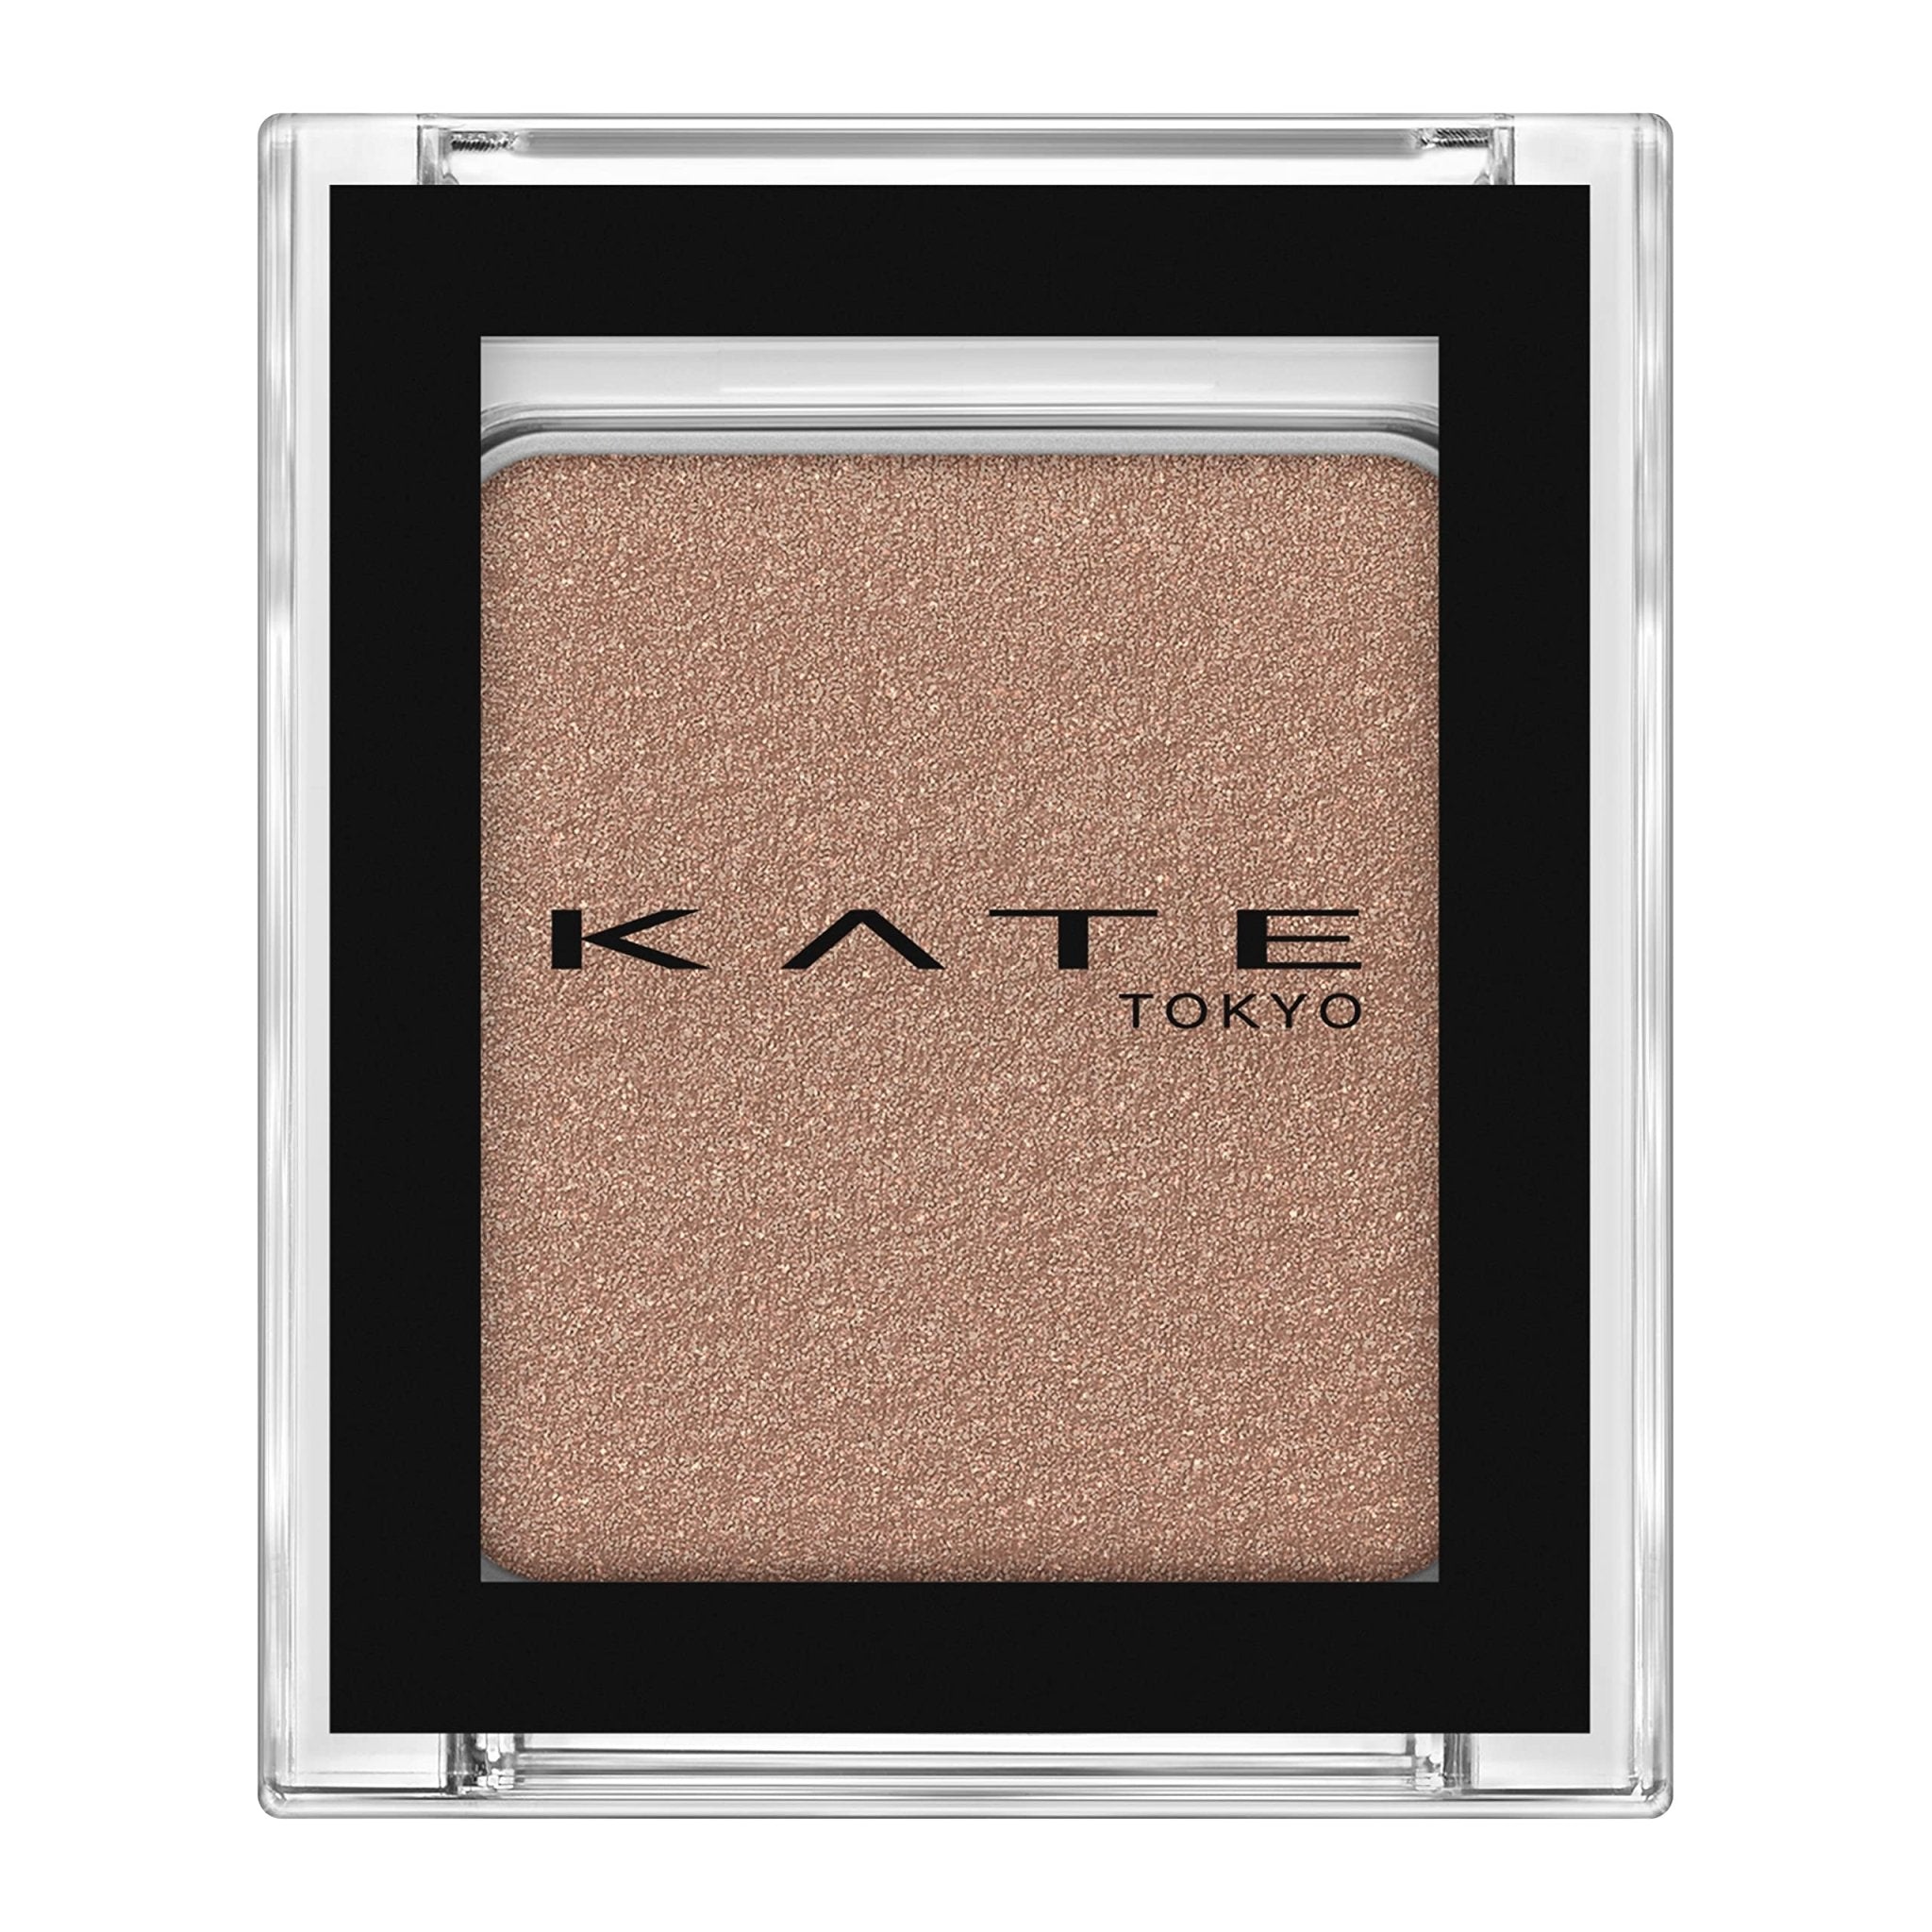 Kate Eye Color 059 Soft Beige Pearl Thank You For The Rest 1 - Piece